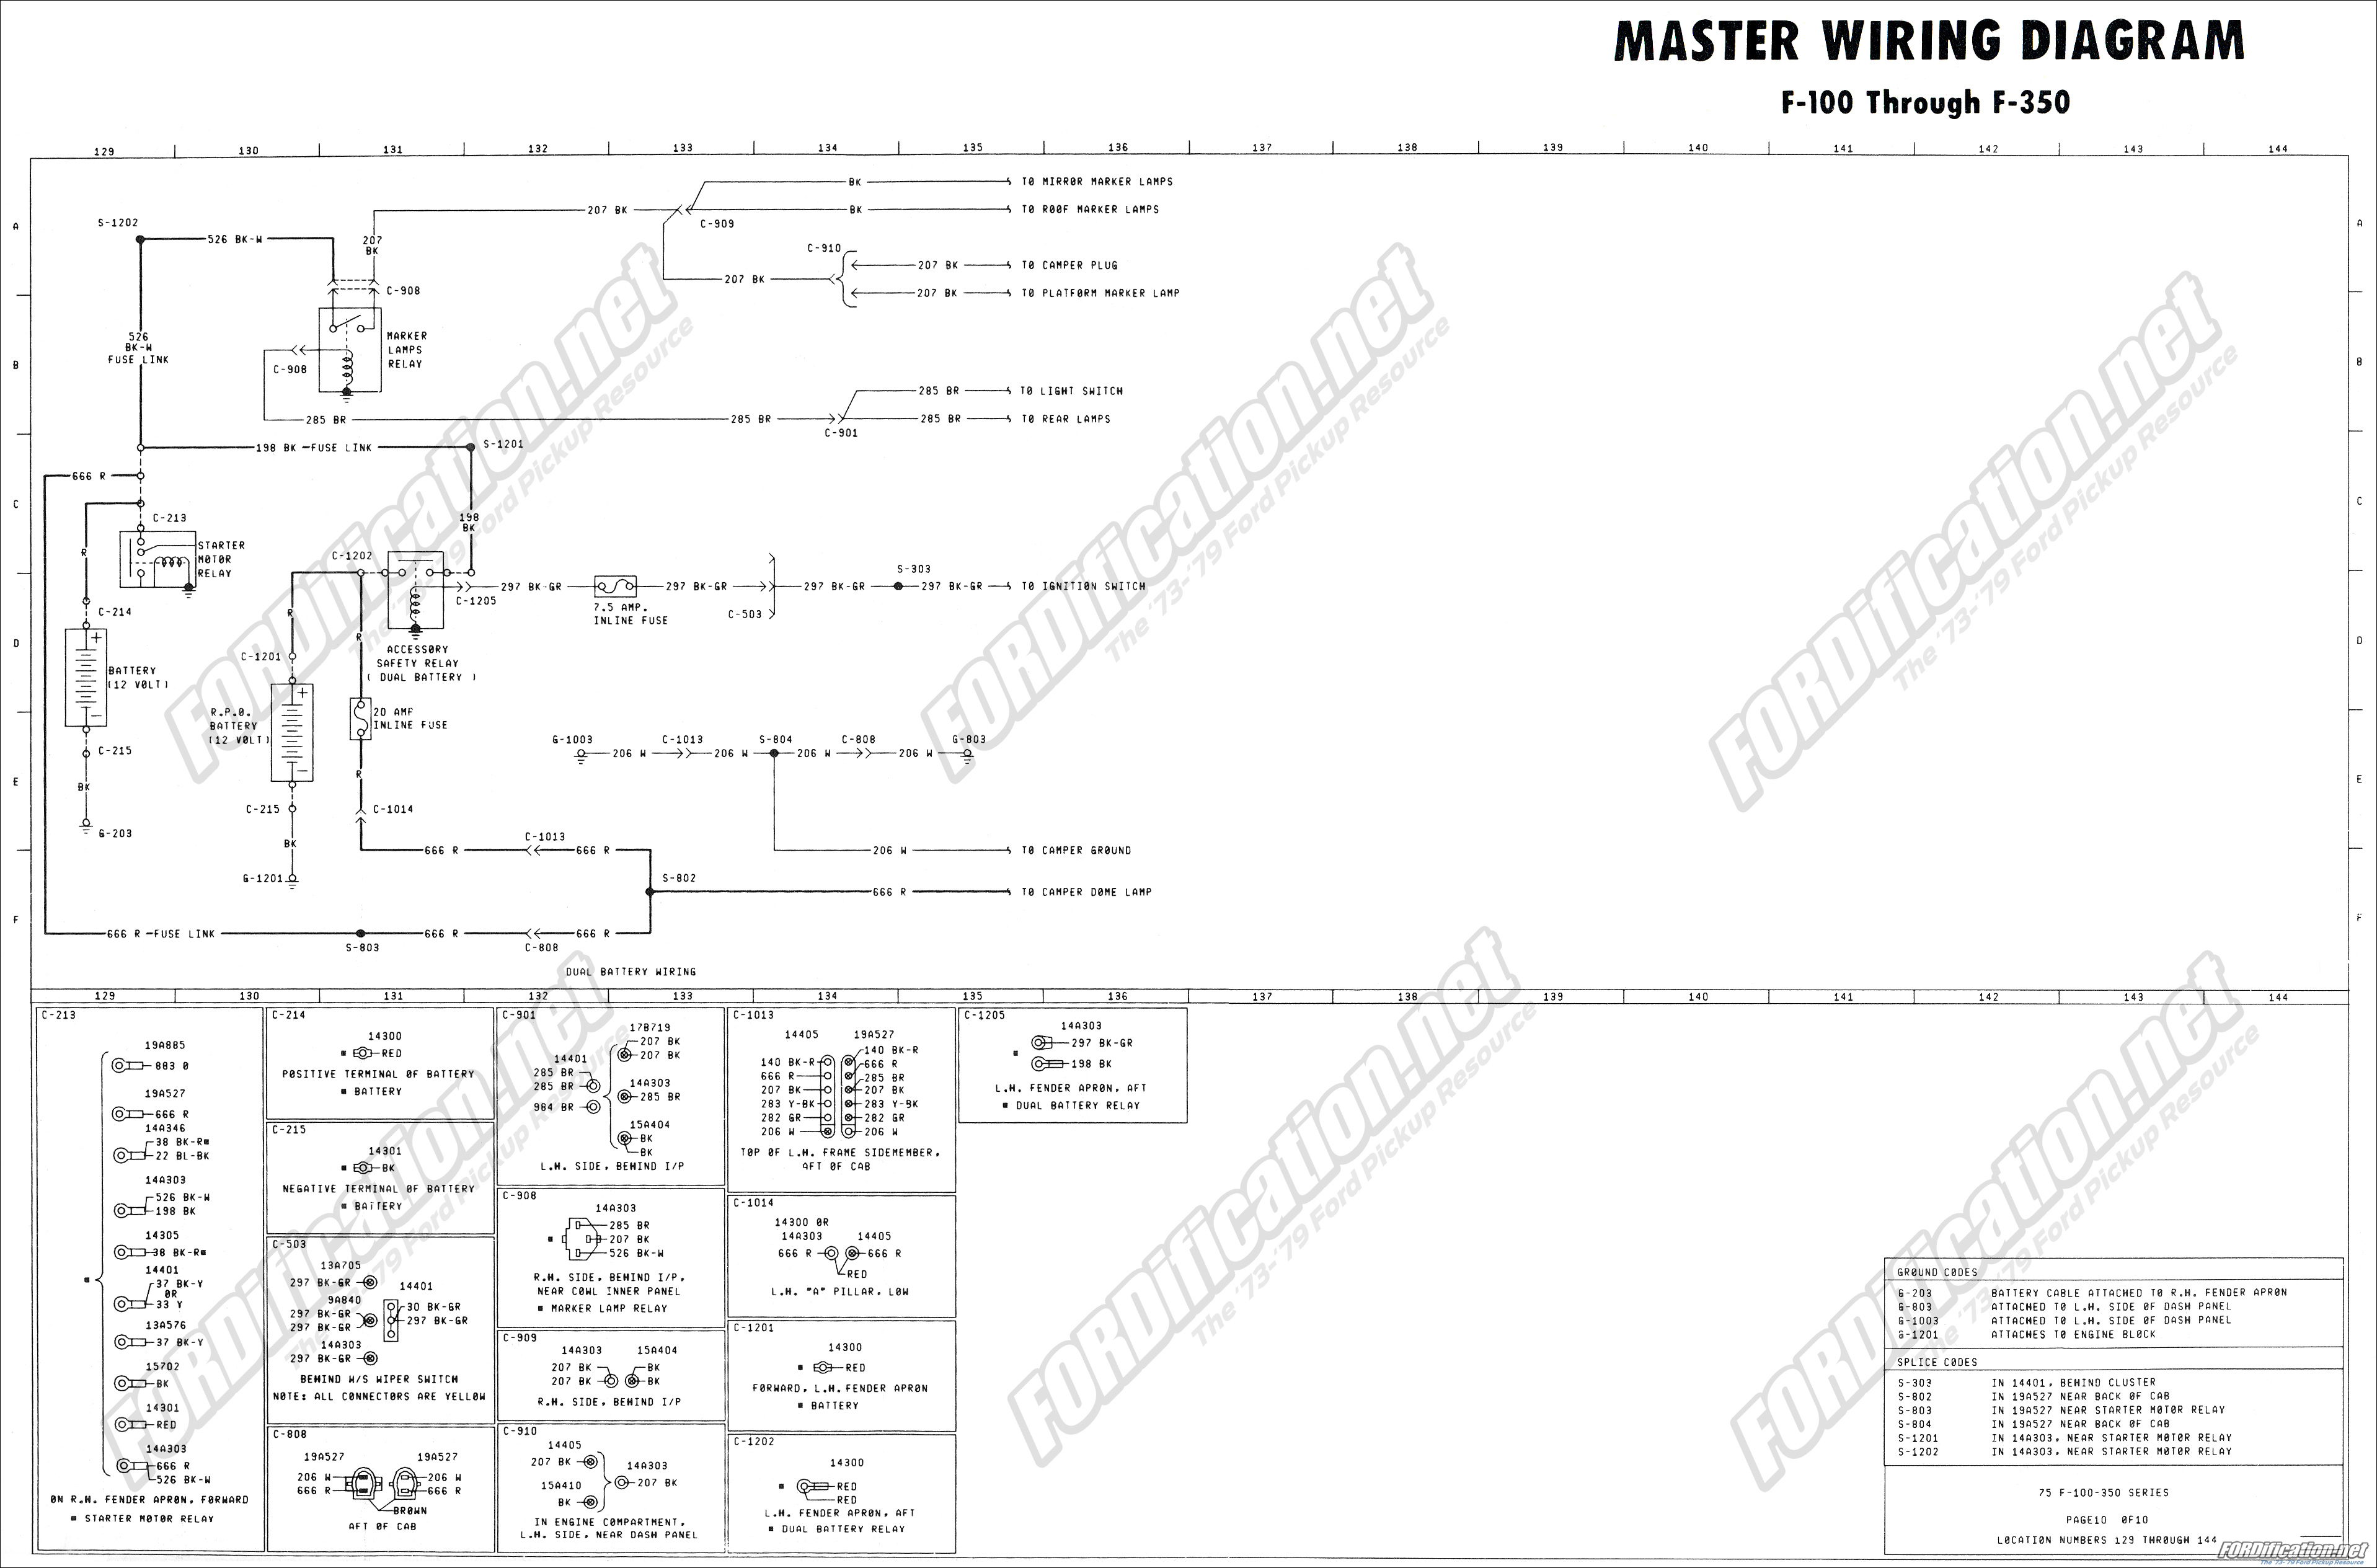 1973-1979 Ford Truck Wiring Diagrams & Schematics - FORDification.net